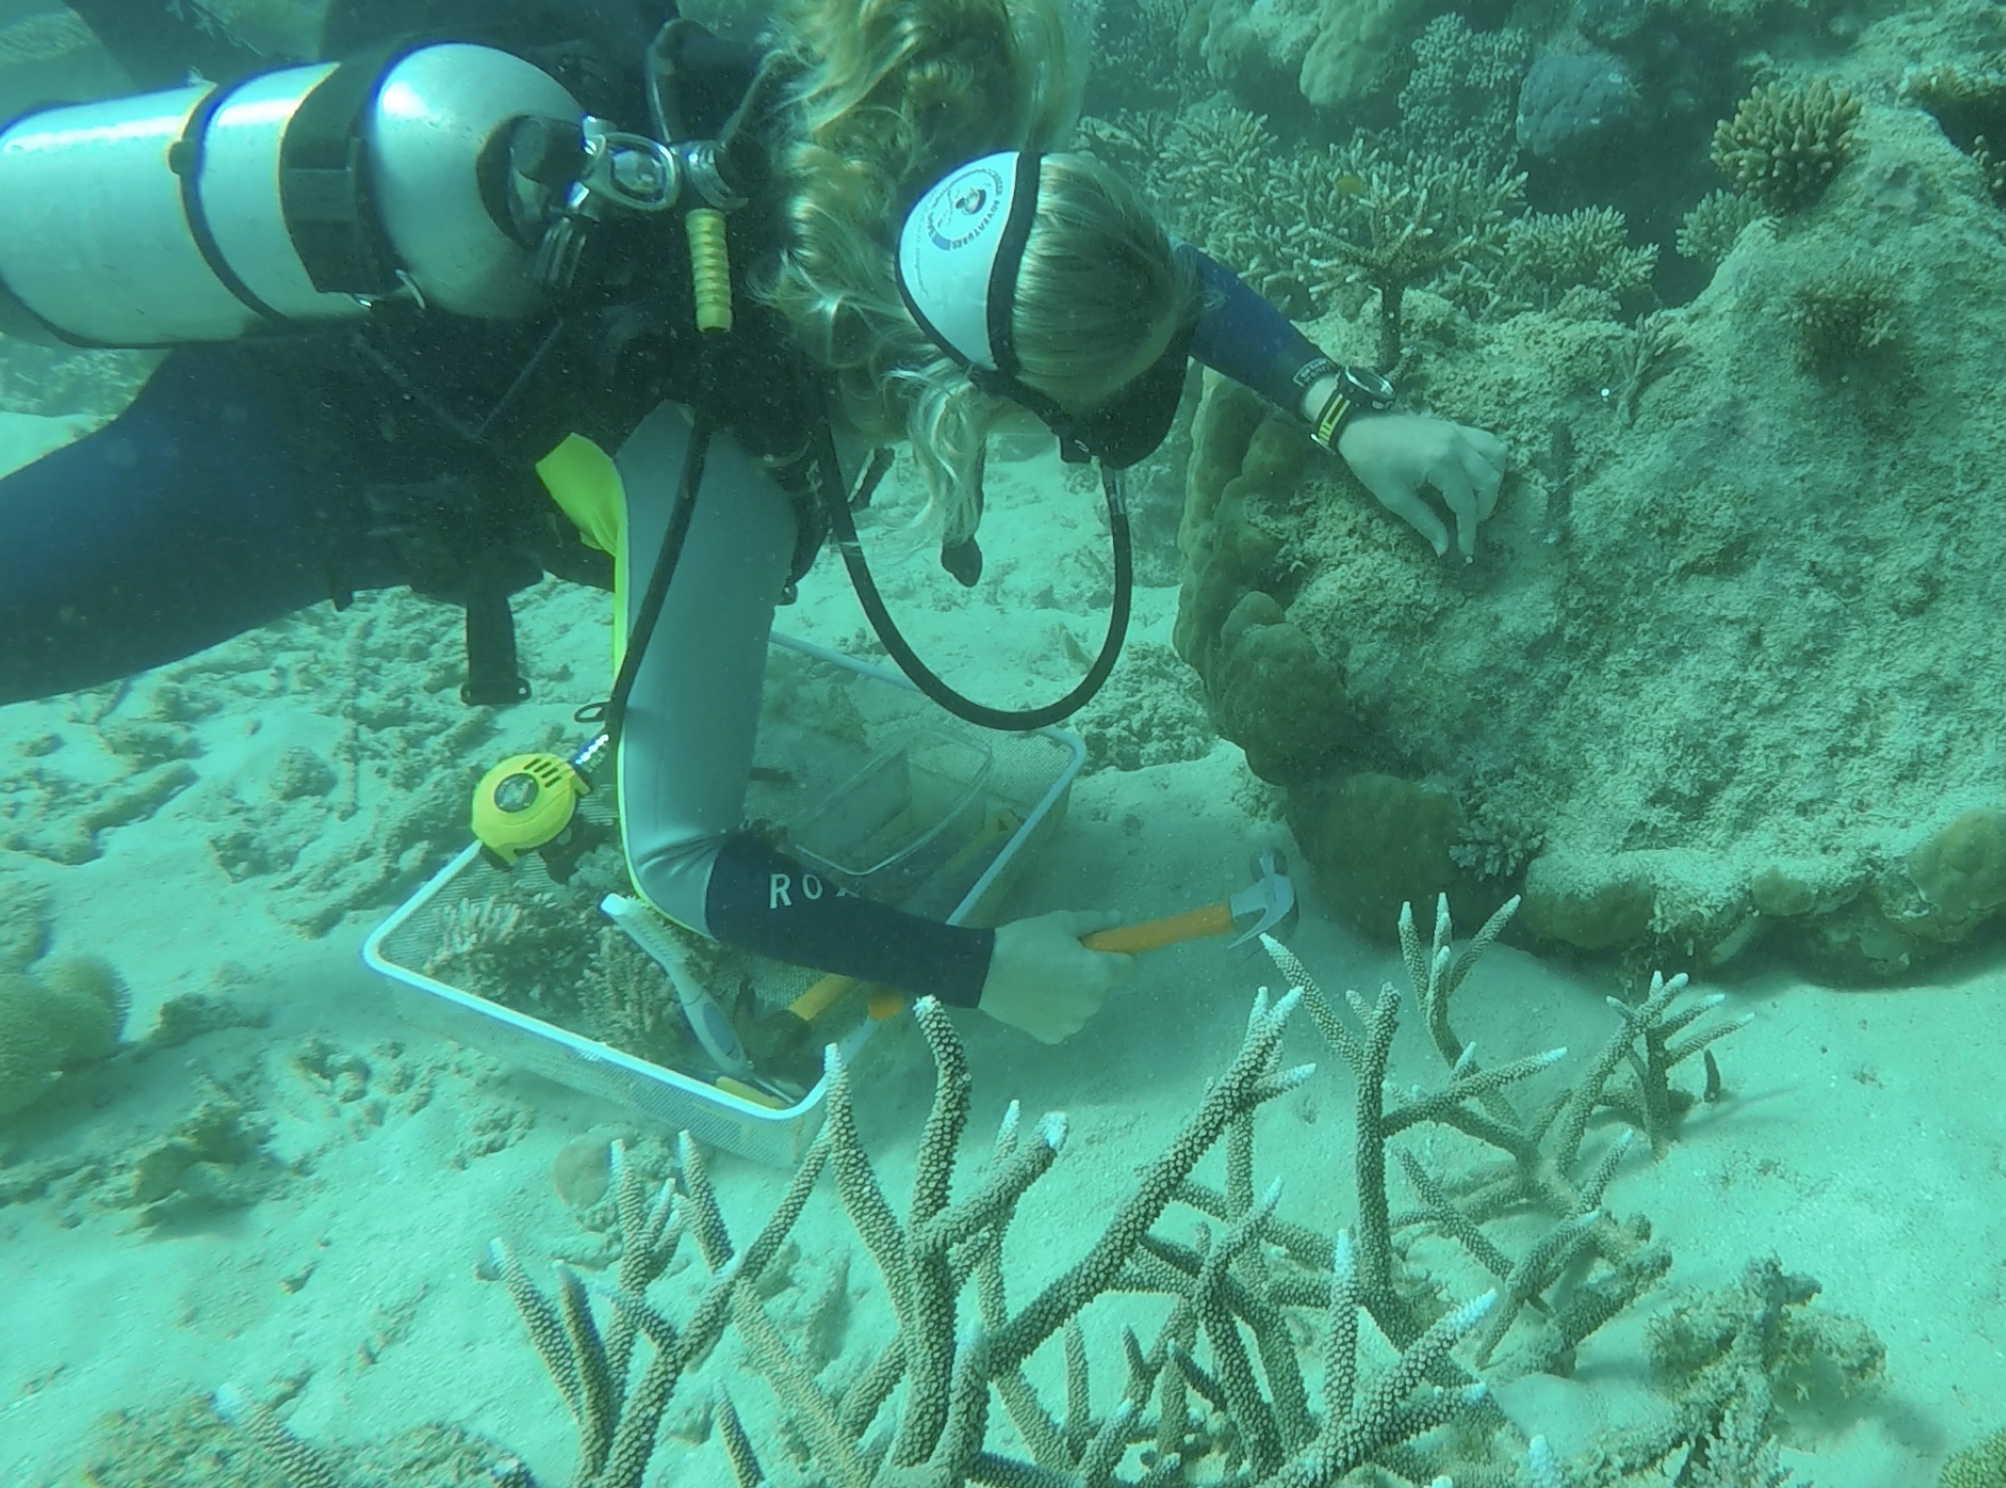 Trials of a novel low cost device, to help the rapid replanting of coral, are taking place on the Great Barrier Reef. Credit: David Suggett (Only to be used with this story)